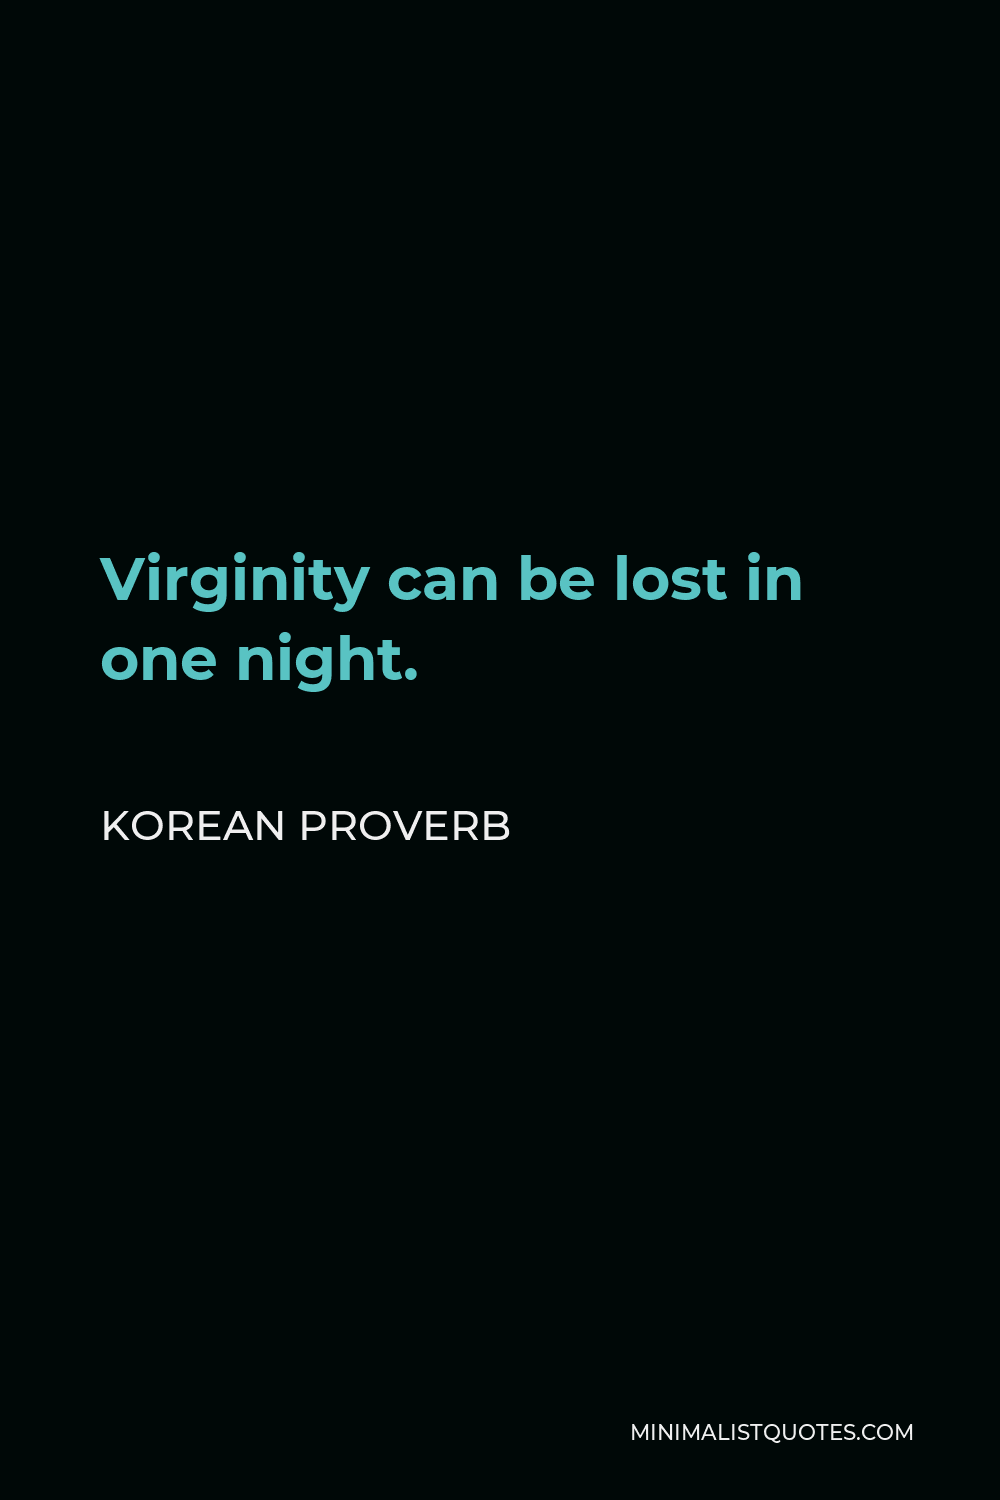 Korean Proverb Quote - Virginity can be lost in one night.